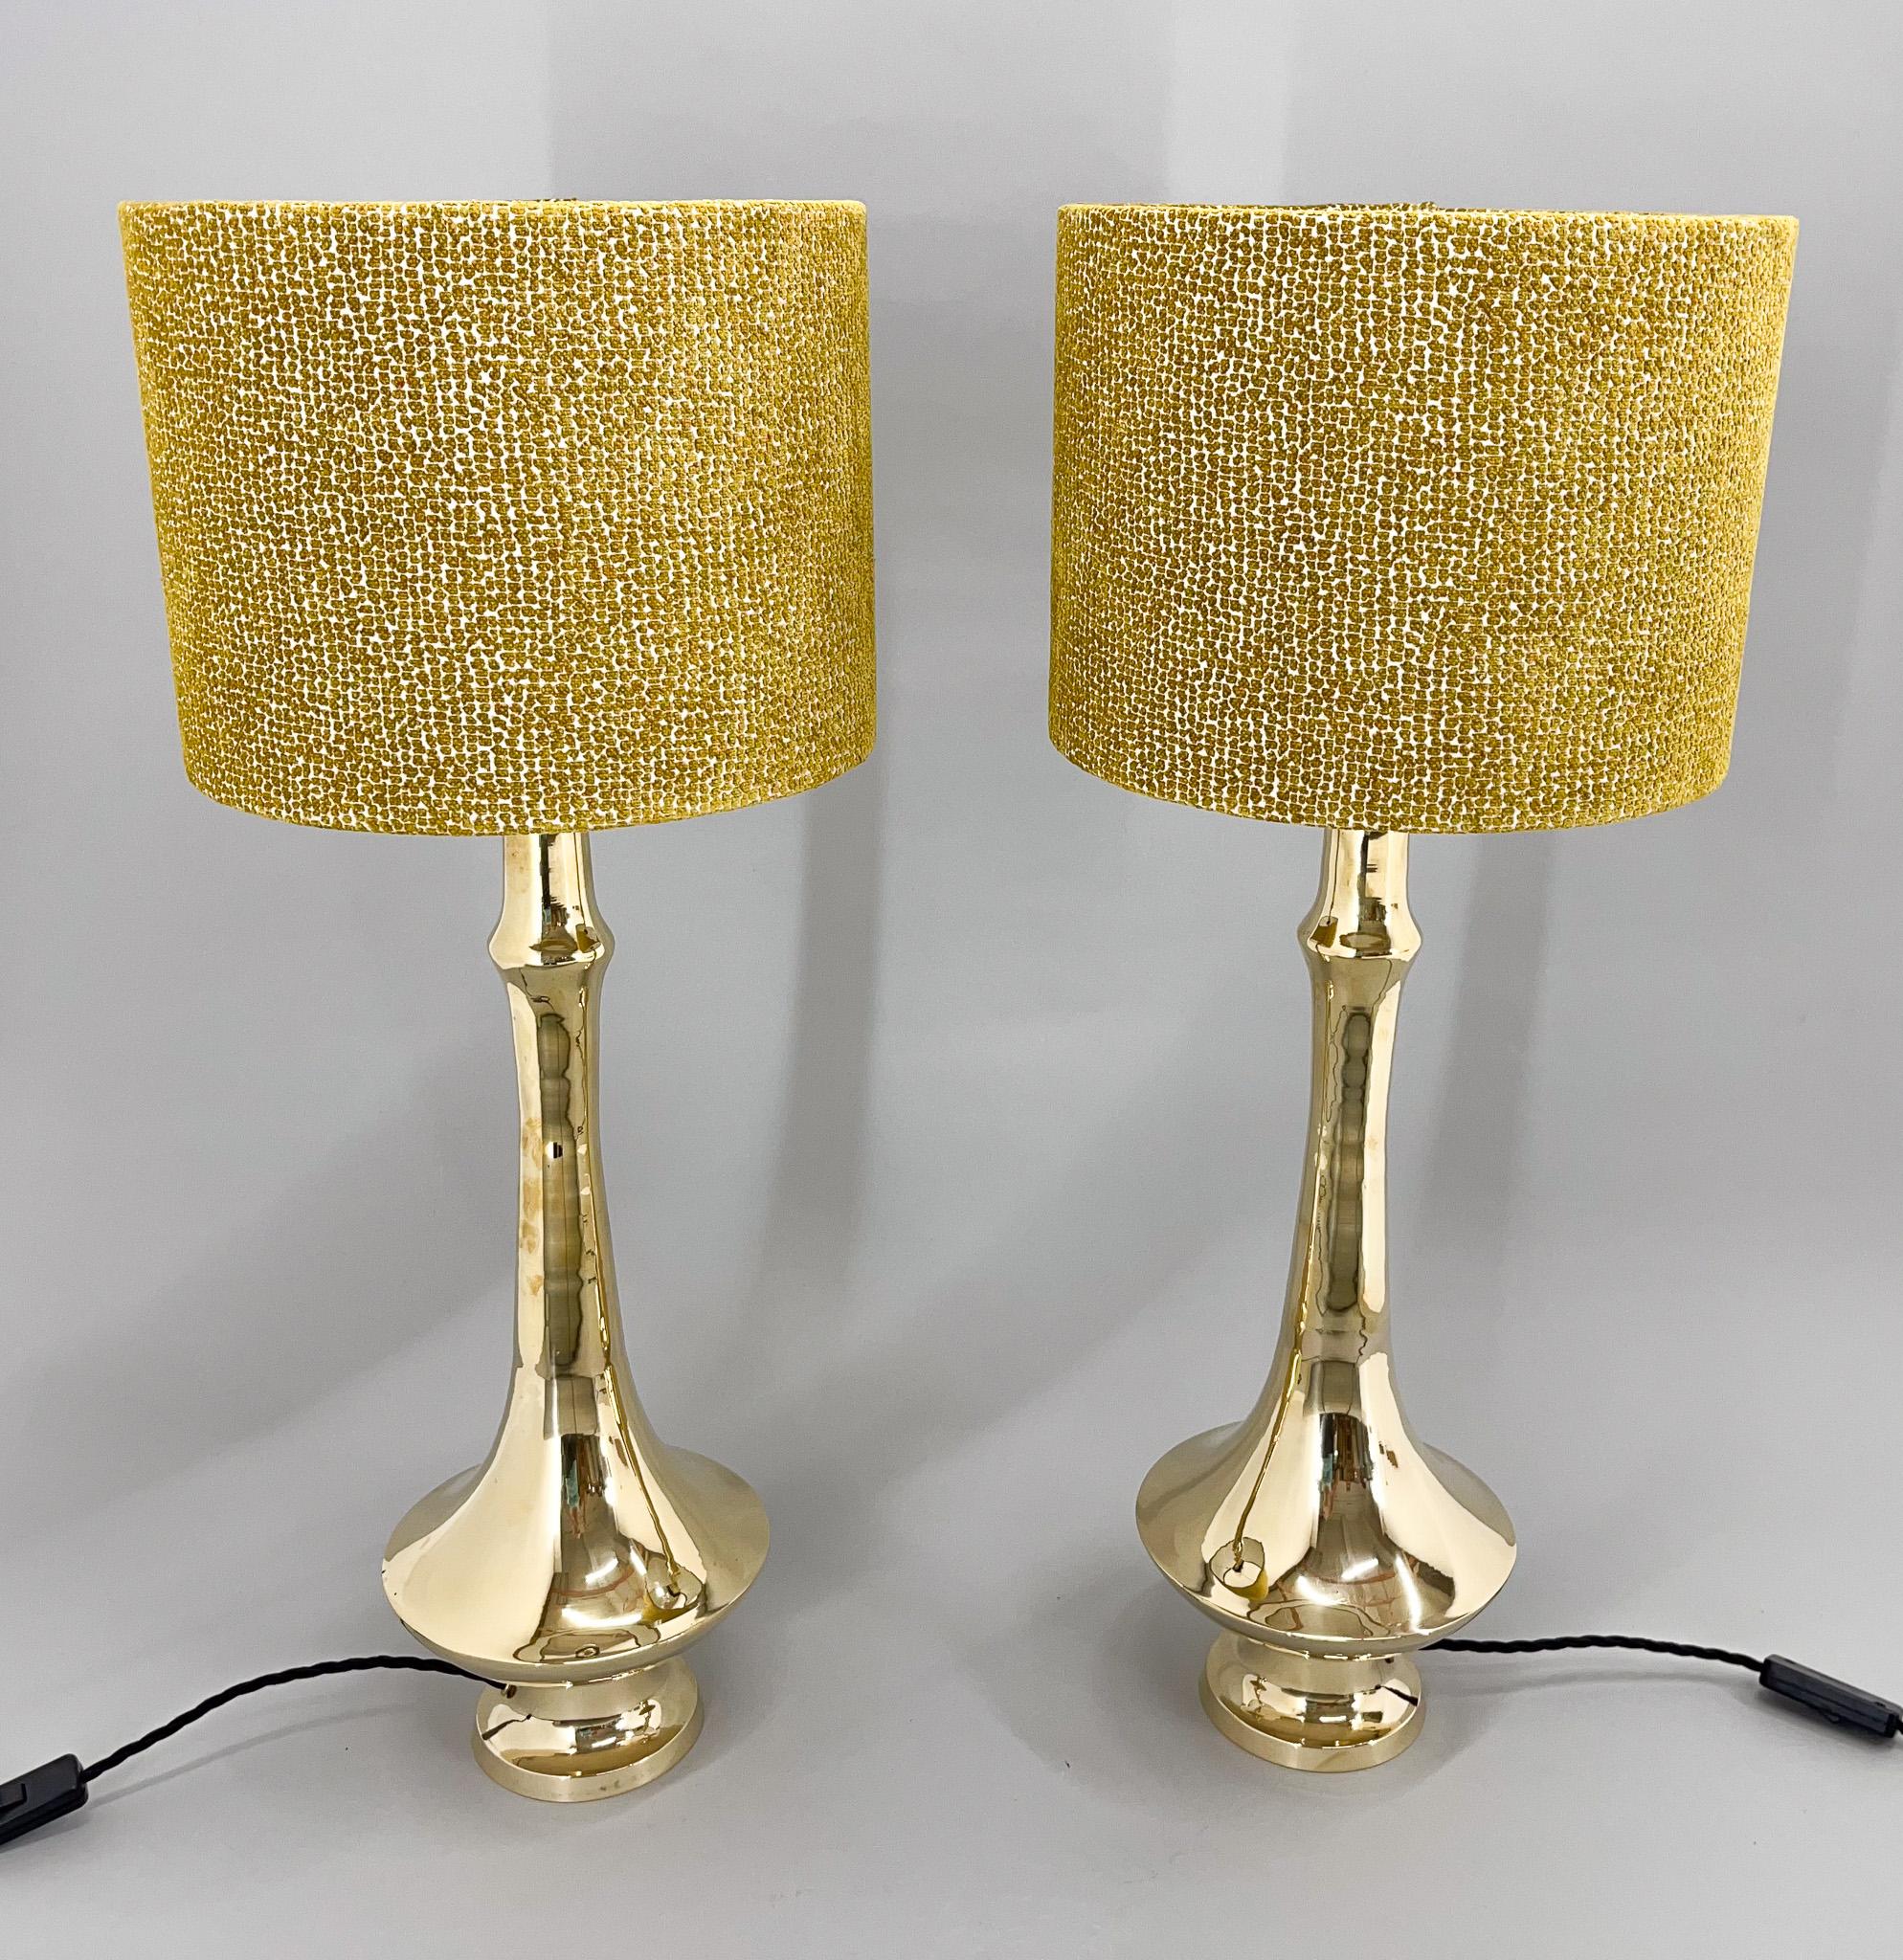 Pair of Tall Brass Table Lamps, 1950s, Restored For Sale 6